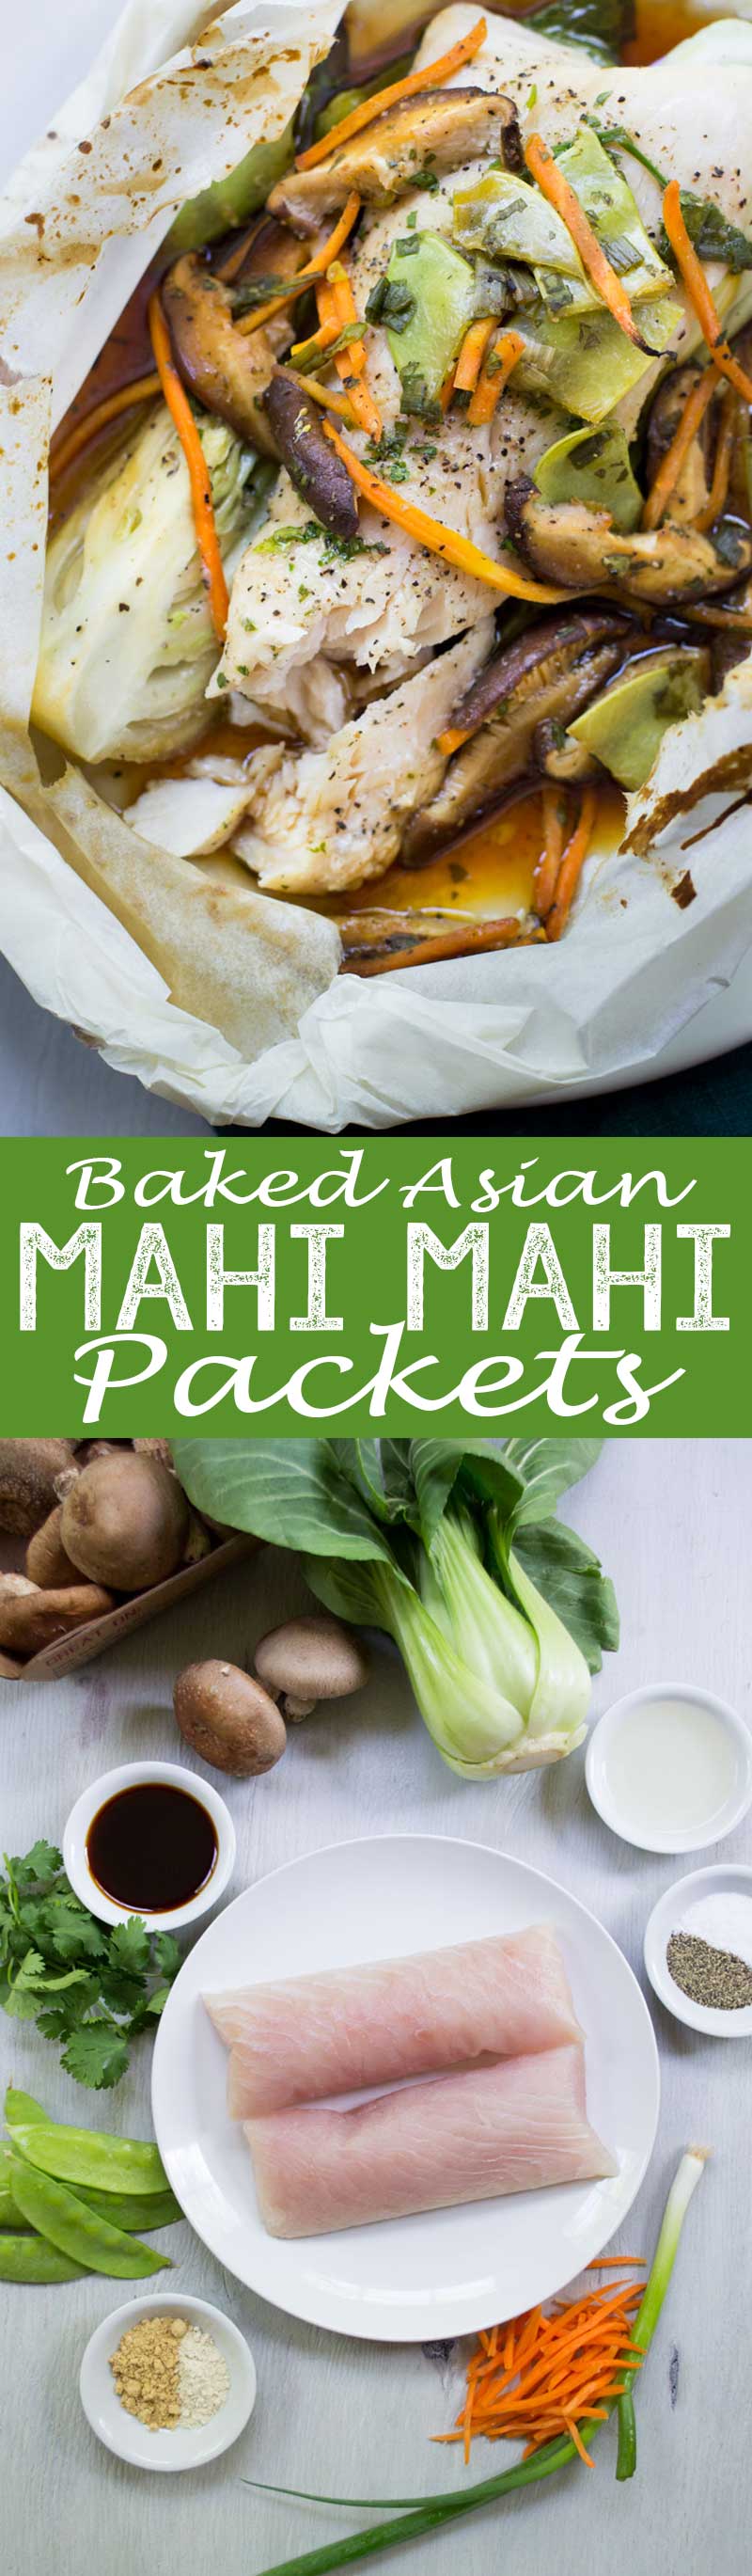 Such a fantastic dinner, these baked asian mahi mahi packets will rock your tastebuds